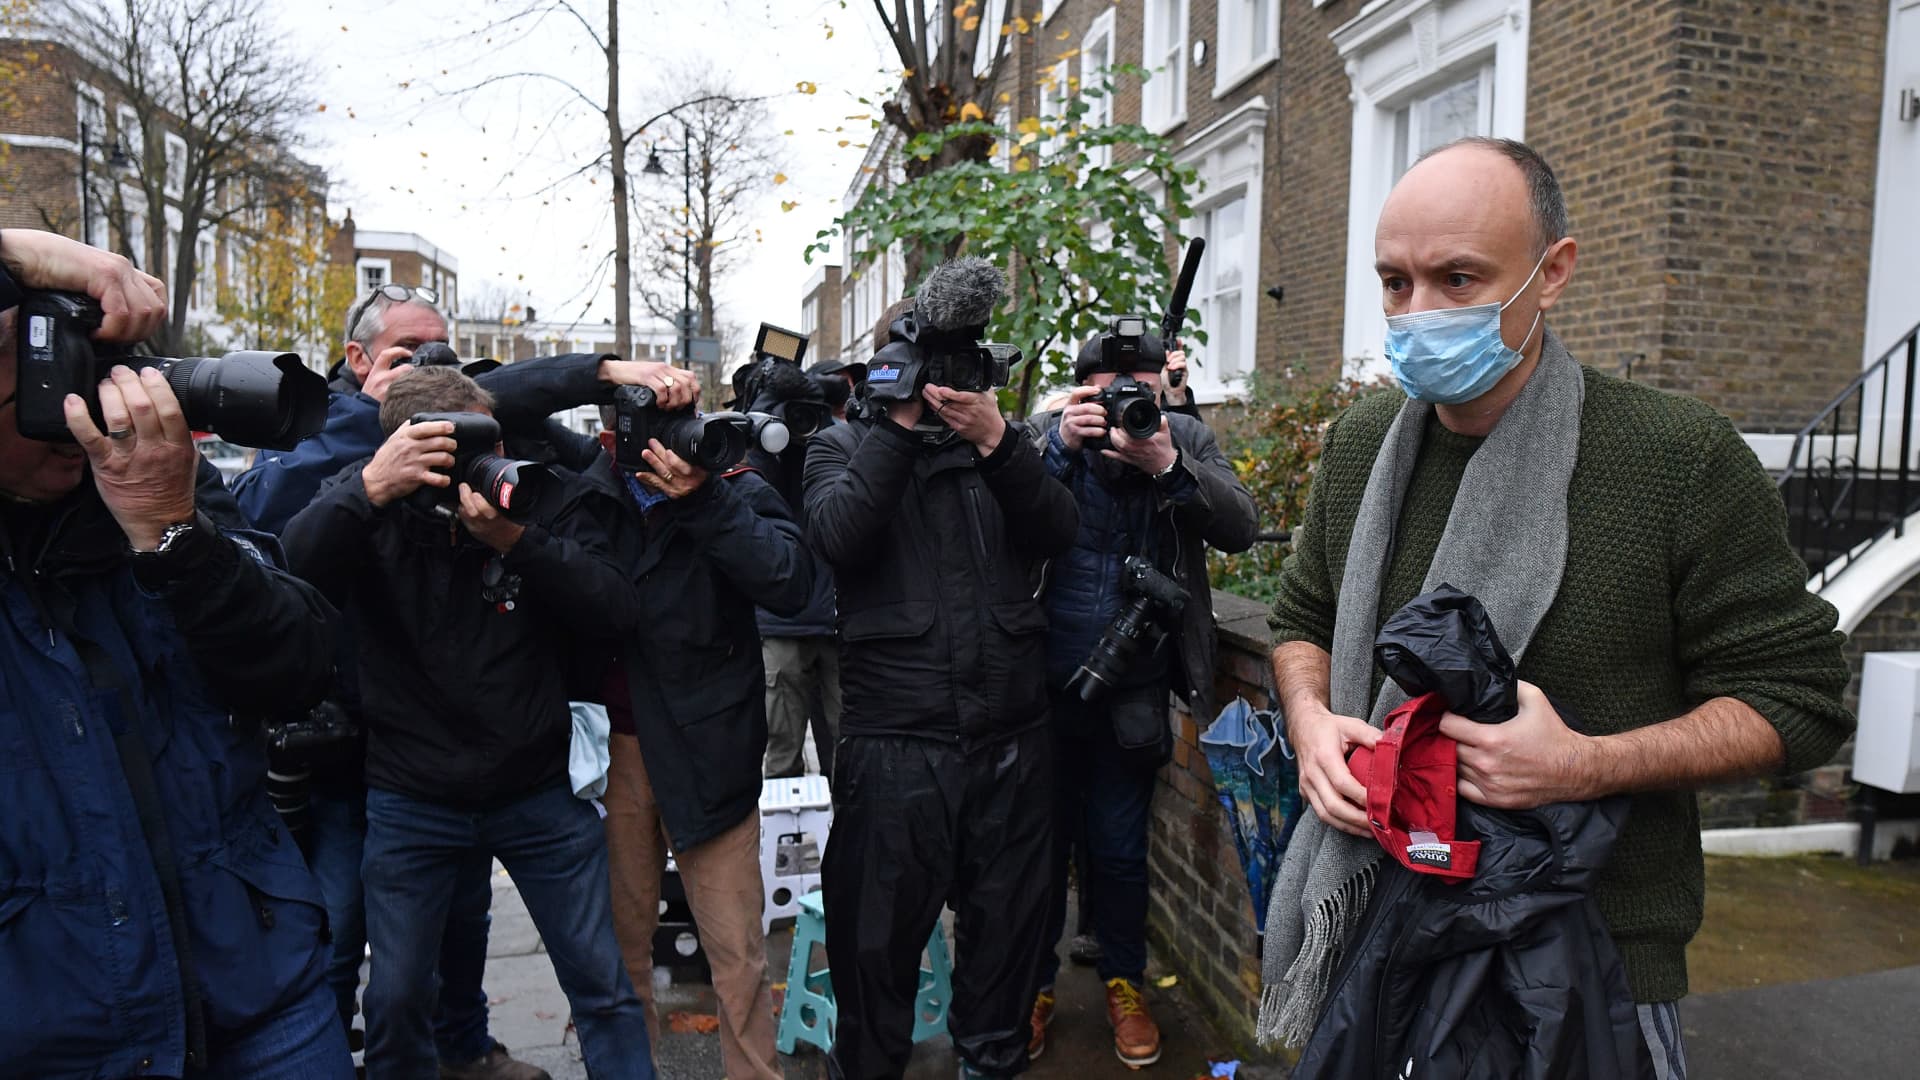 Members of the media surround former Number 10 special advisor Dominic Cummings (R) as he leaves his residence in London on November 14, 2020.